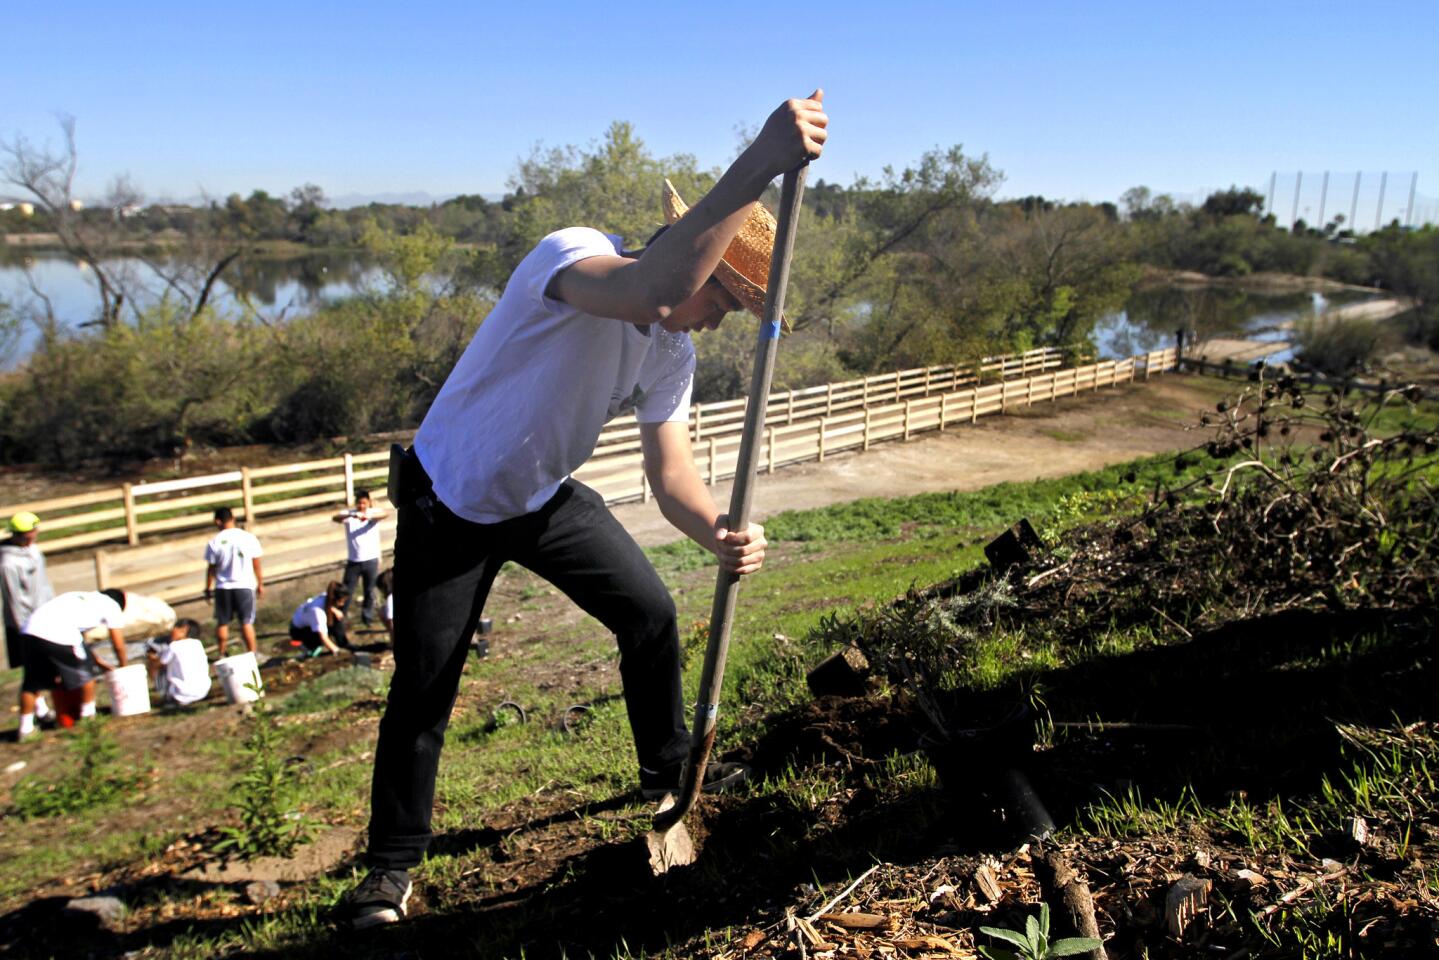 Blake Byrnes, 18, of Buena Park is among the volunteers from local schools and the nonprofit International Environmental Service Club who are planting native black sage, purple sage and coyote brush in hopes of attracting endangered species to Ken Malloy Harbor Regional Park.